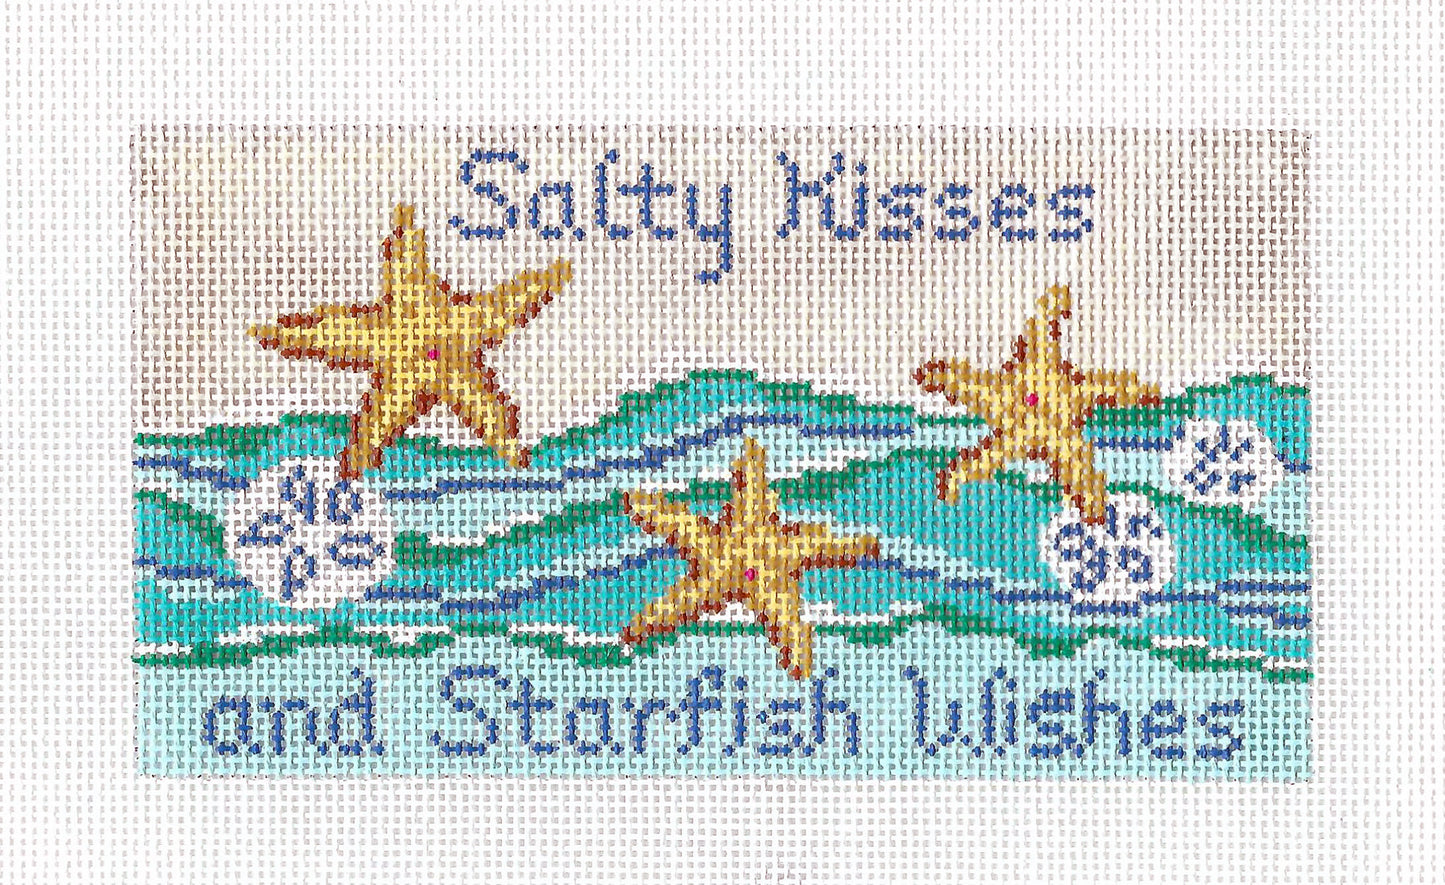 Seaside ~ Summer Beachside saying with Starfish handpainted Needlepoint Canvas by Needle Crossings